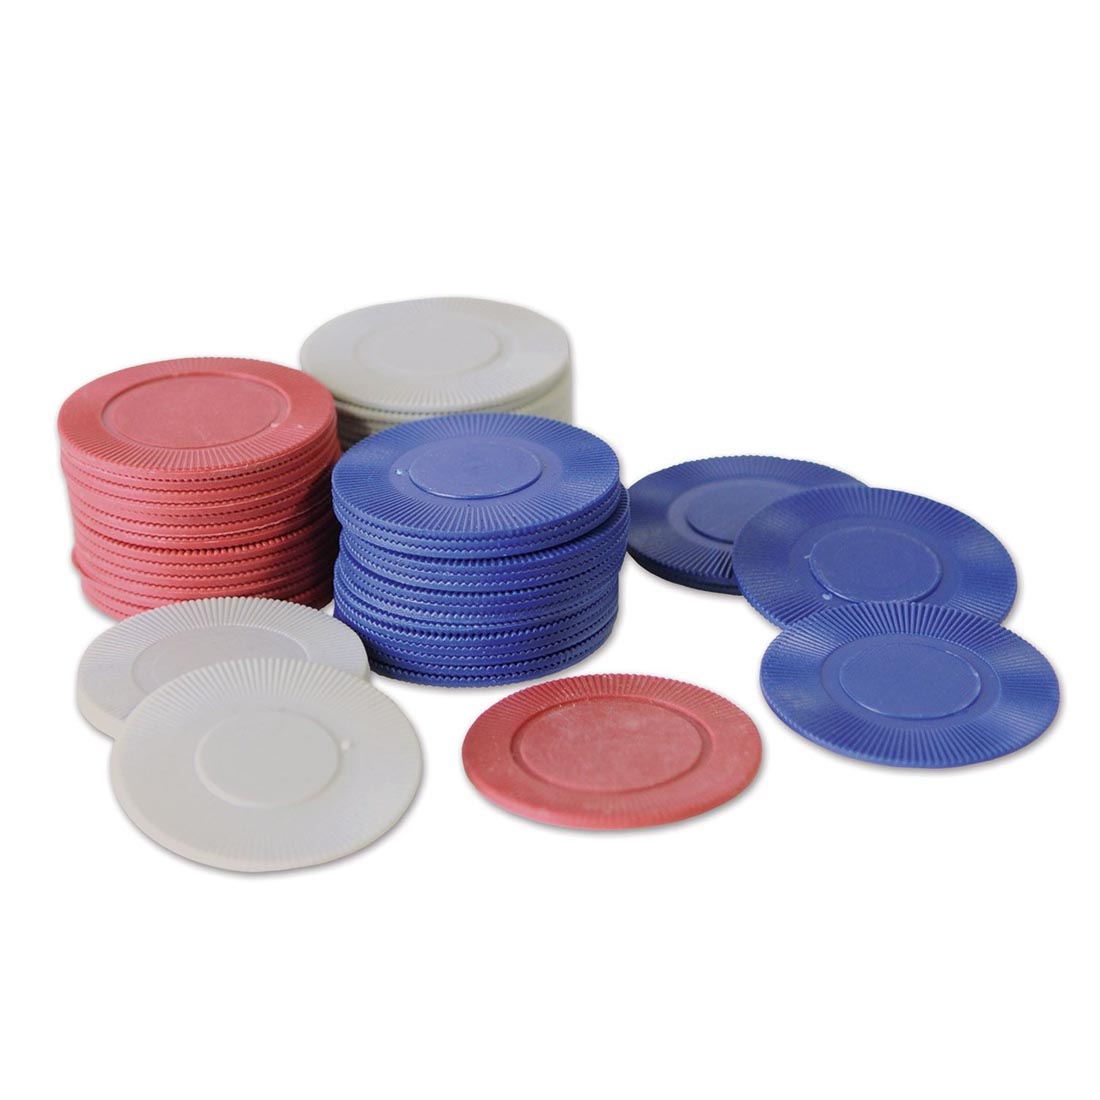 Red, white and blue poker playing chips